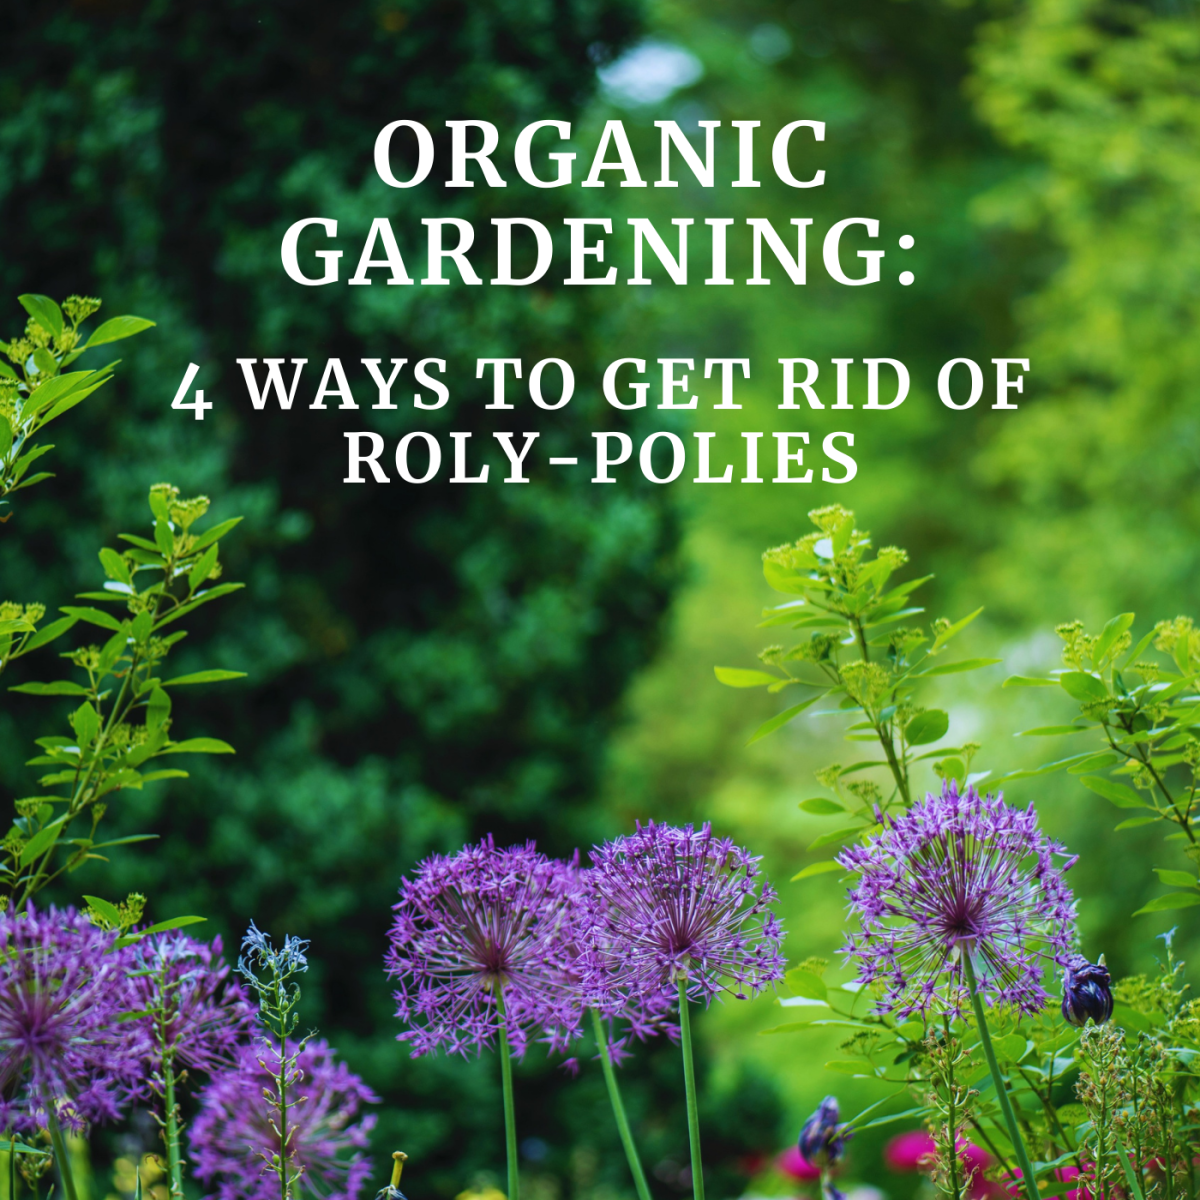 Removing roly-polies and sowbugs from your garden doesn't have to be difficult.